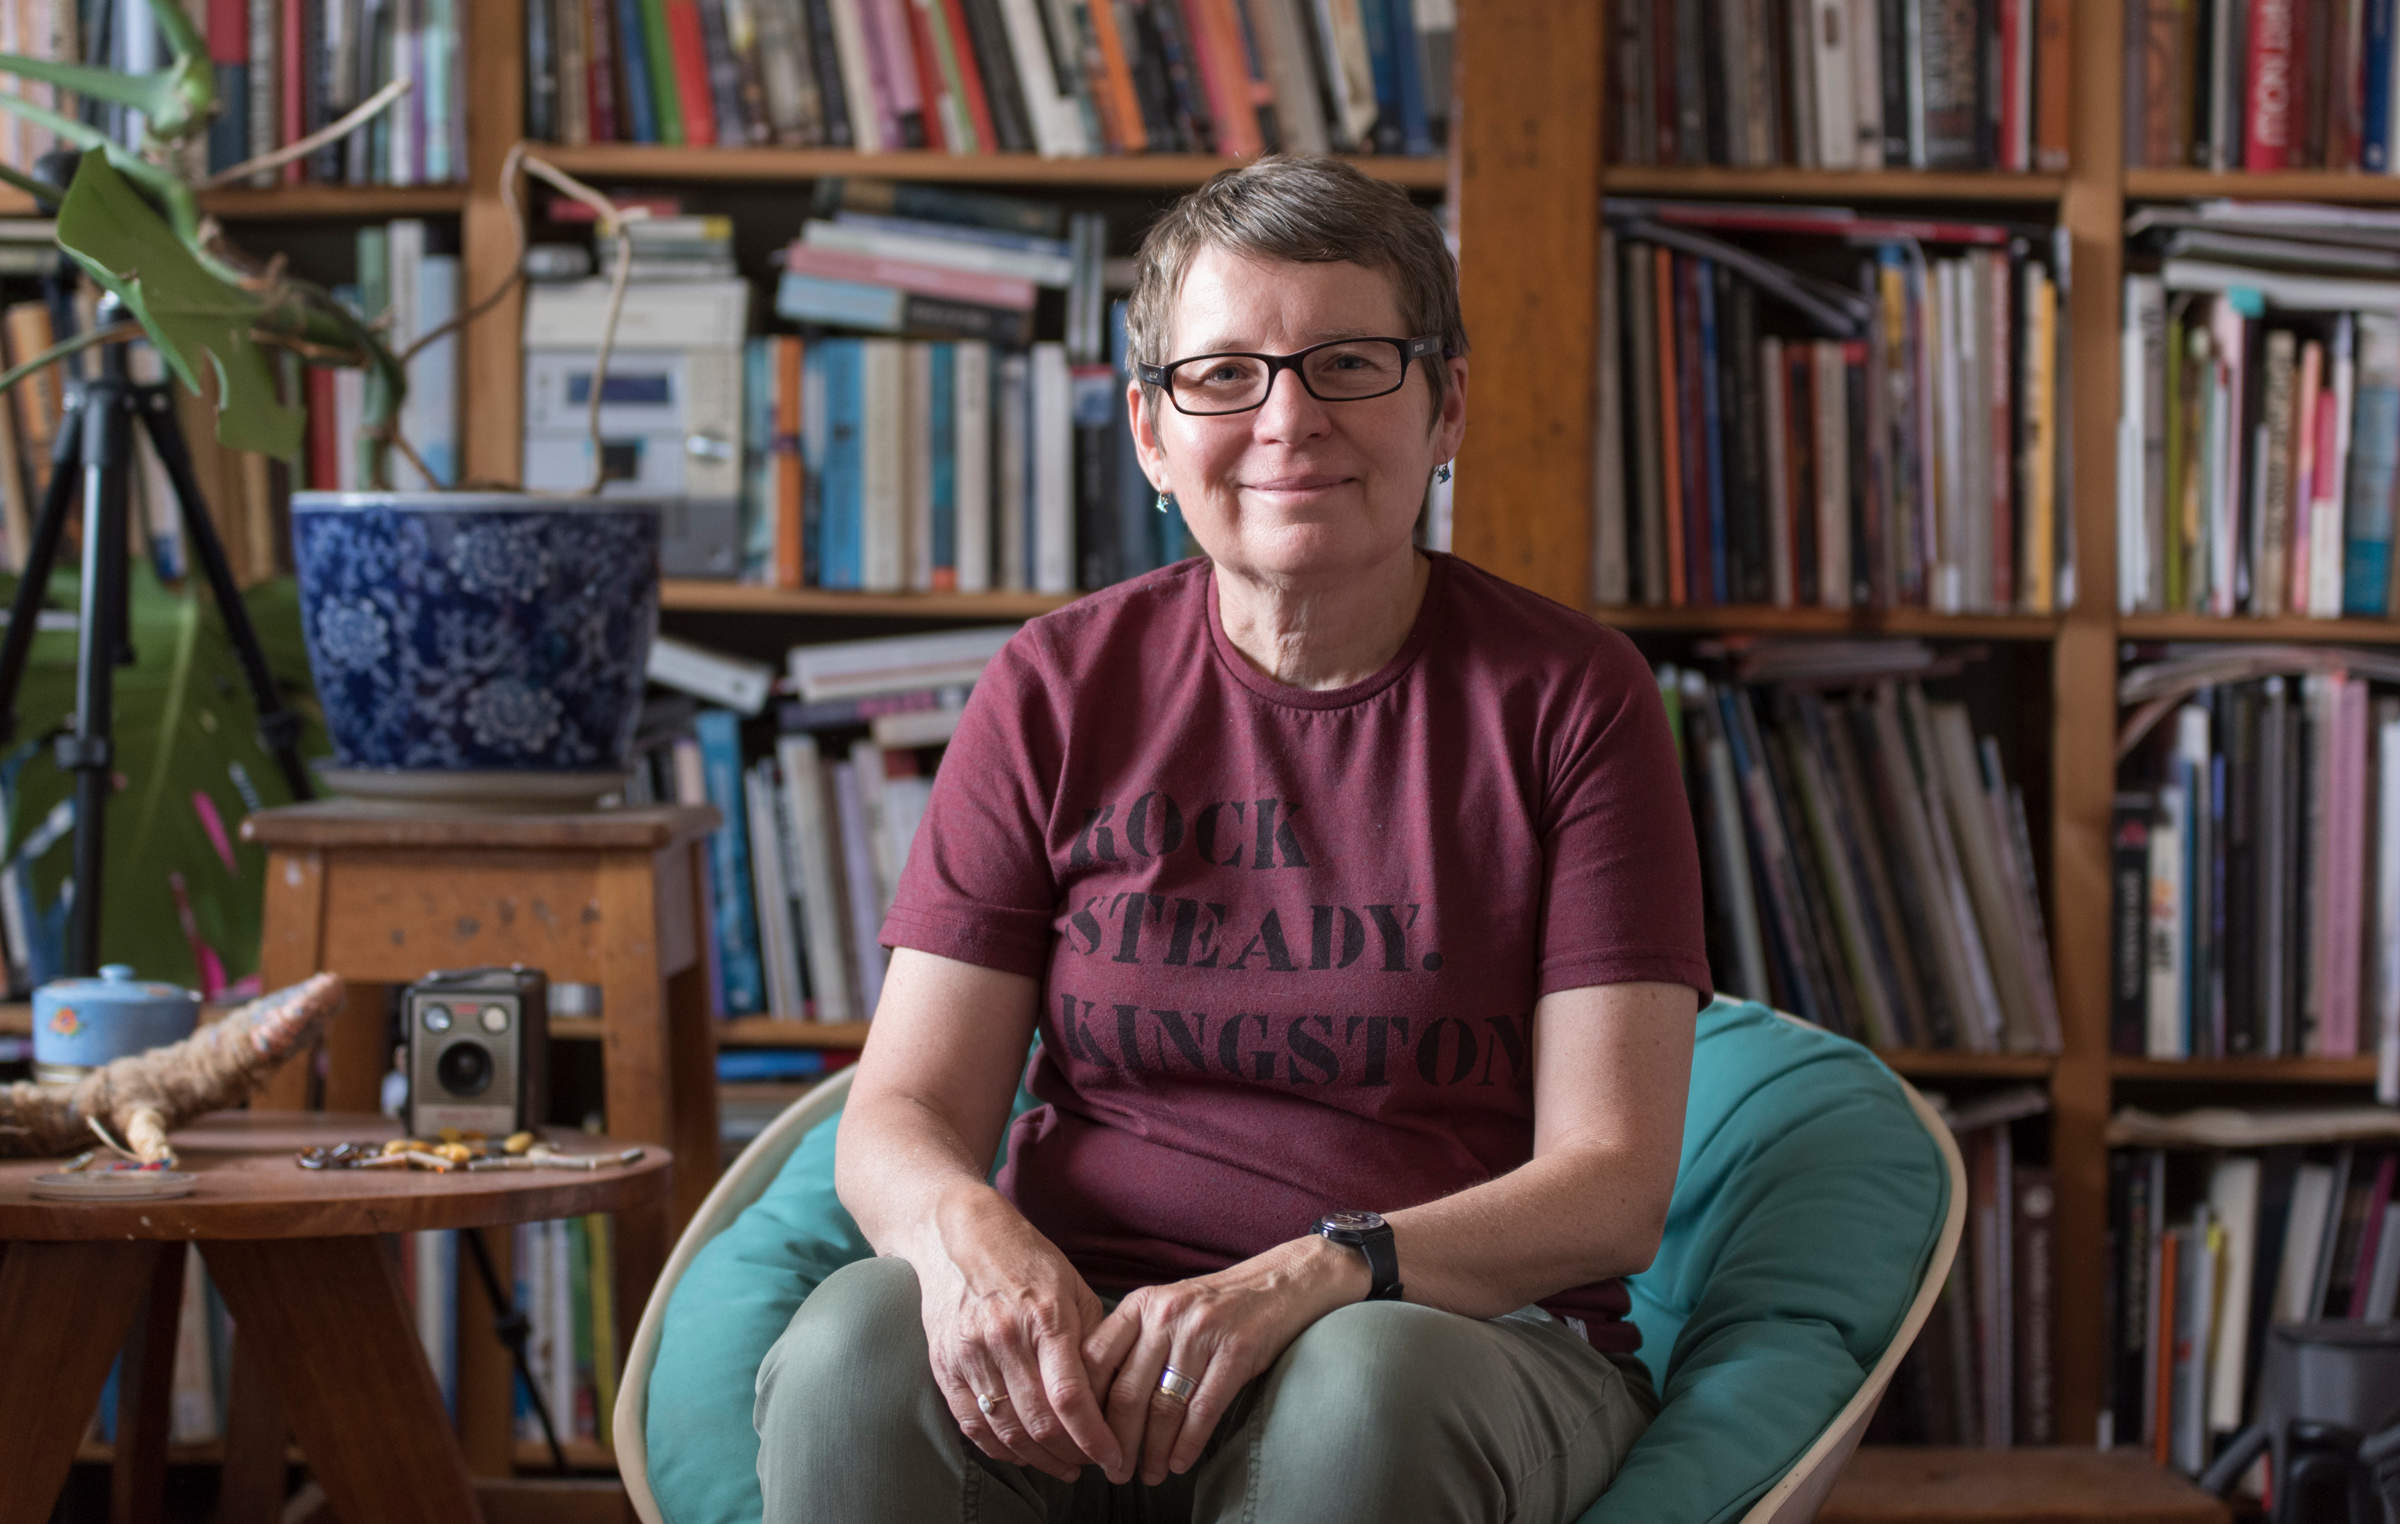 Portrait of artist Julie Gough by photographer Lucy Parakhina. Julie is seated amongst a backdrop of her extensive library of books and smiling at the camera.